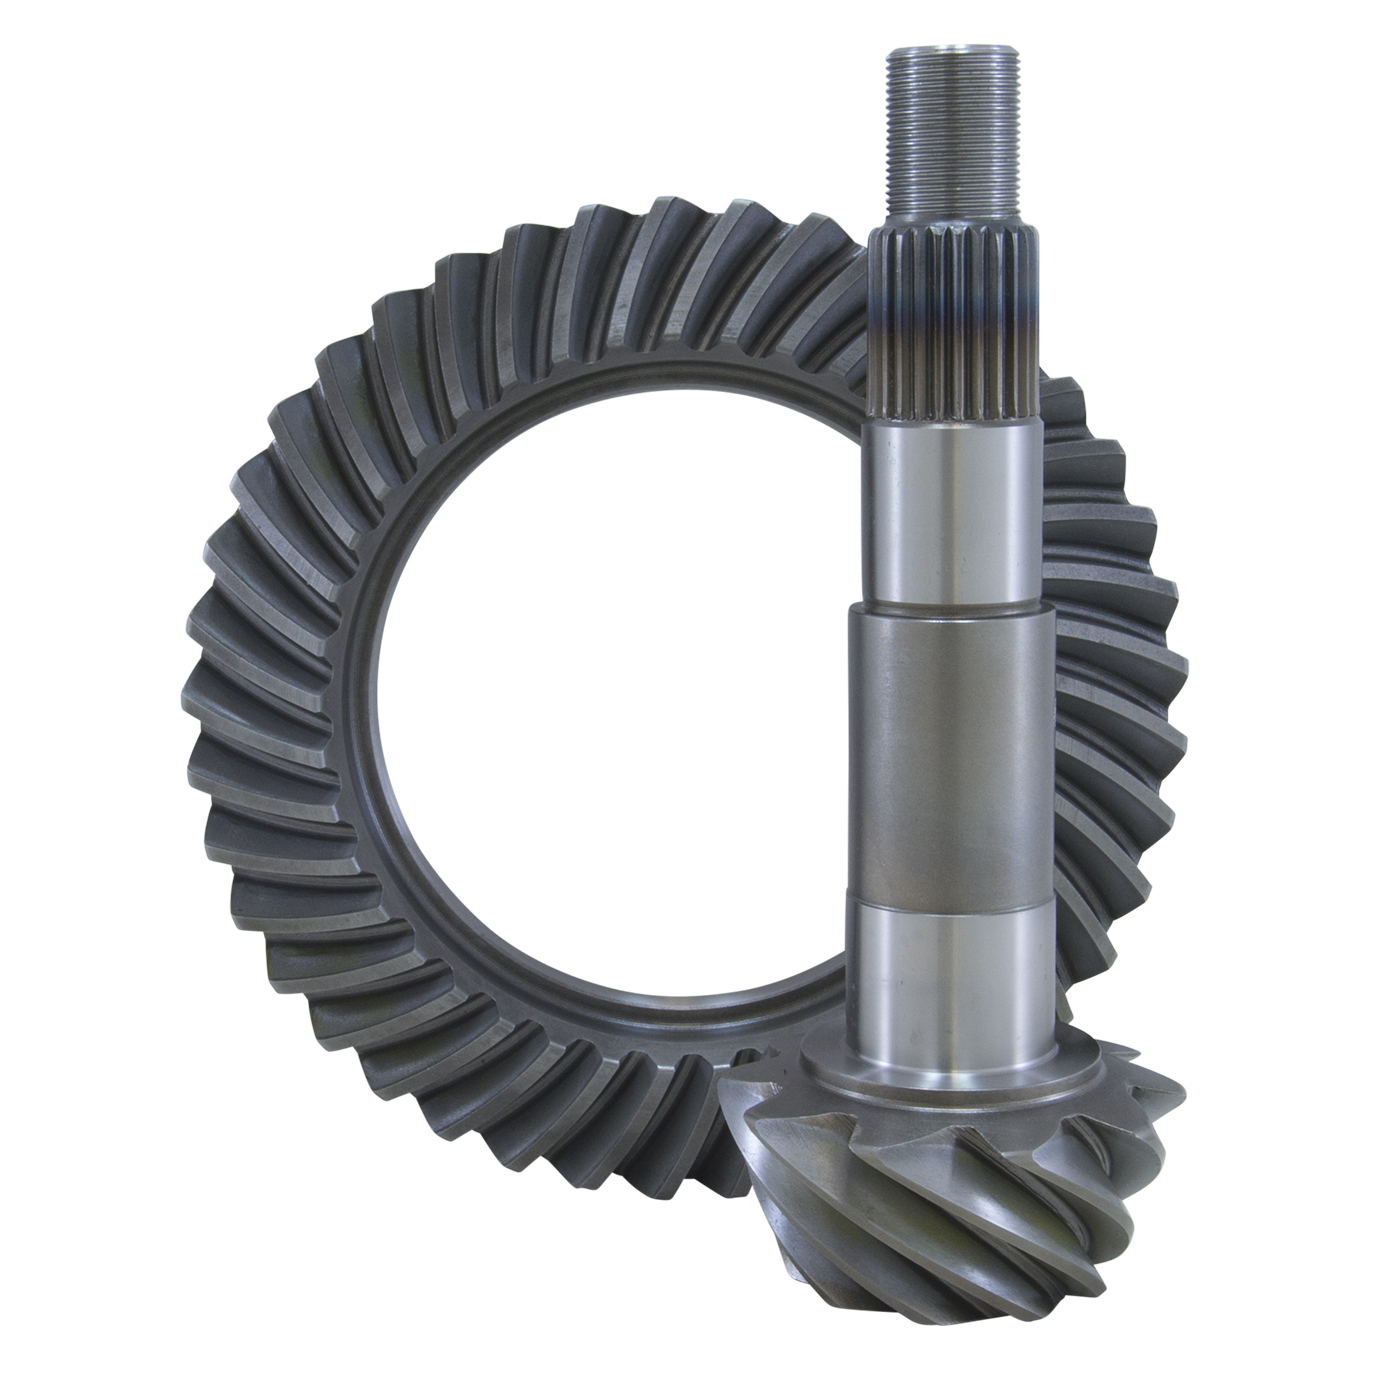 High performance Yukon Ring & Pinion gear set for Model 35 in a 4.56 ratio 